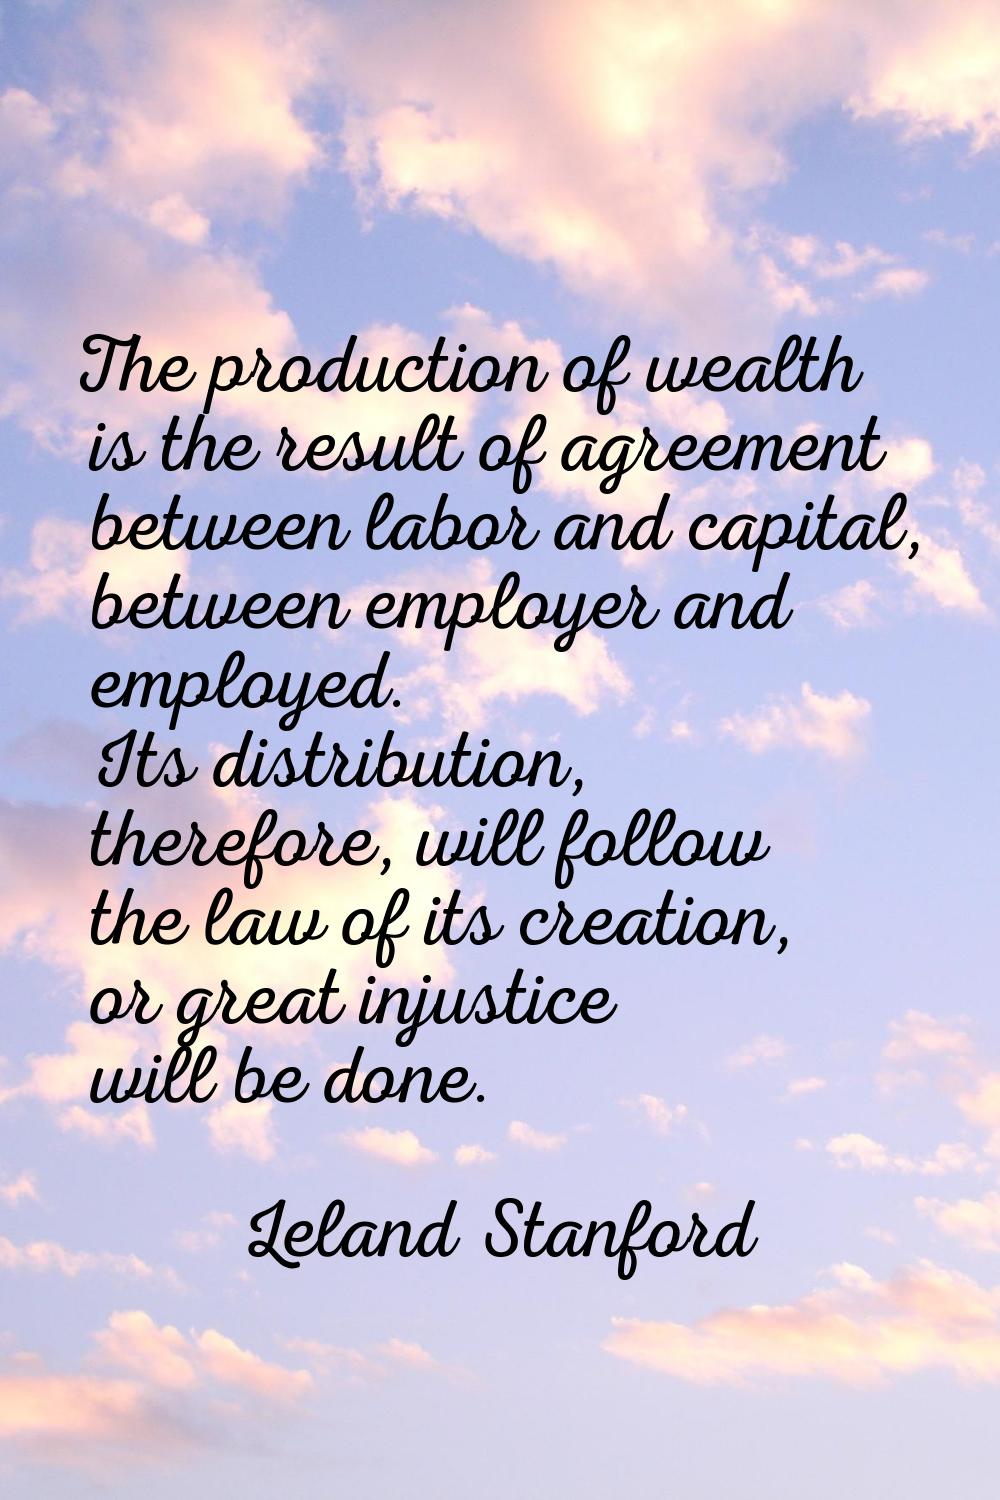 The production of wealth is the result of agreement between labor and capital, between employer and